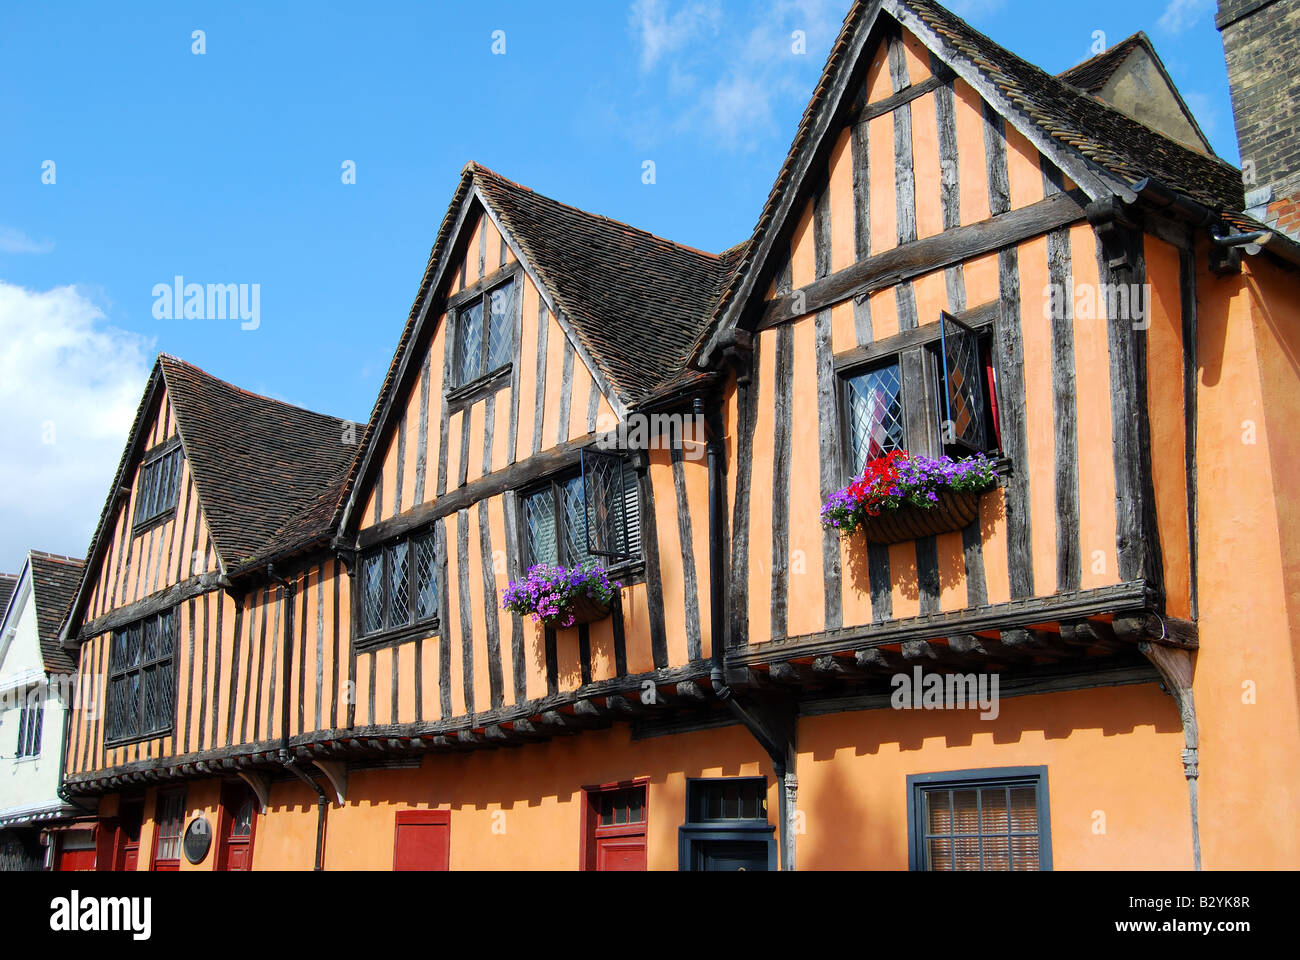 Ancient timber-framed houses, Silent Street, Ipswich, Suffolk, England, United Kingdom Stock Photo